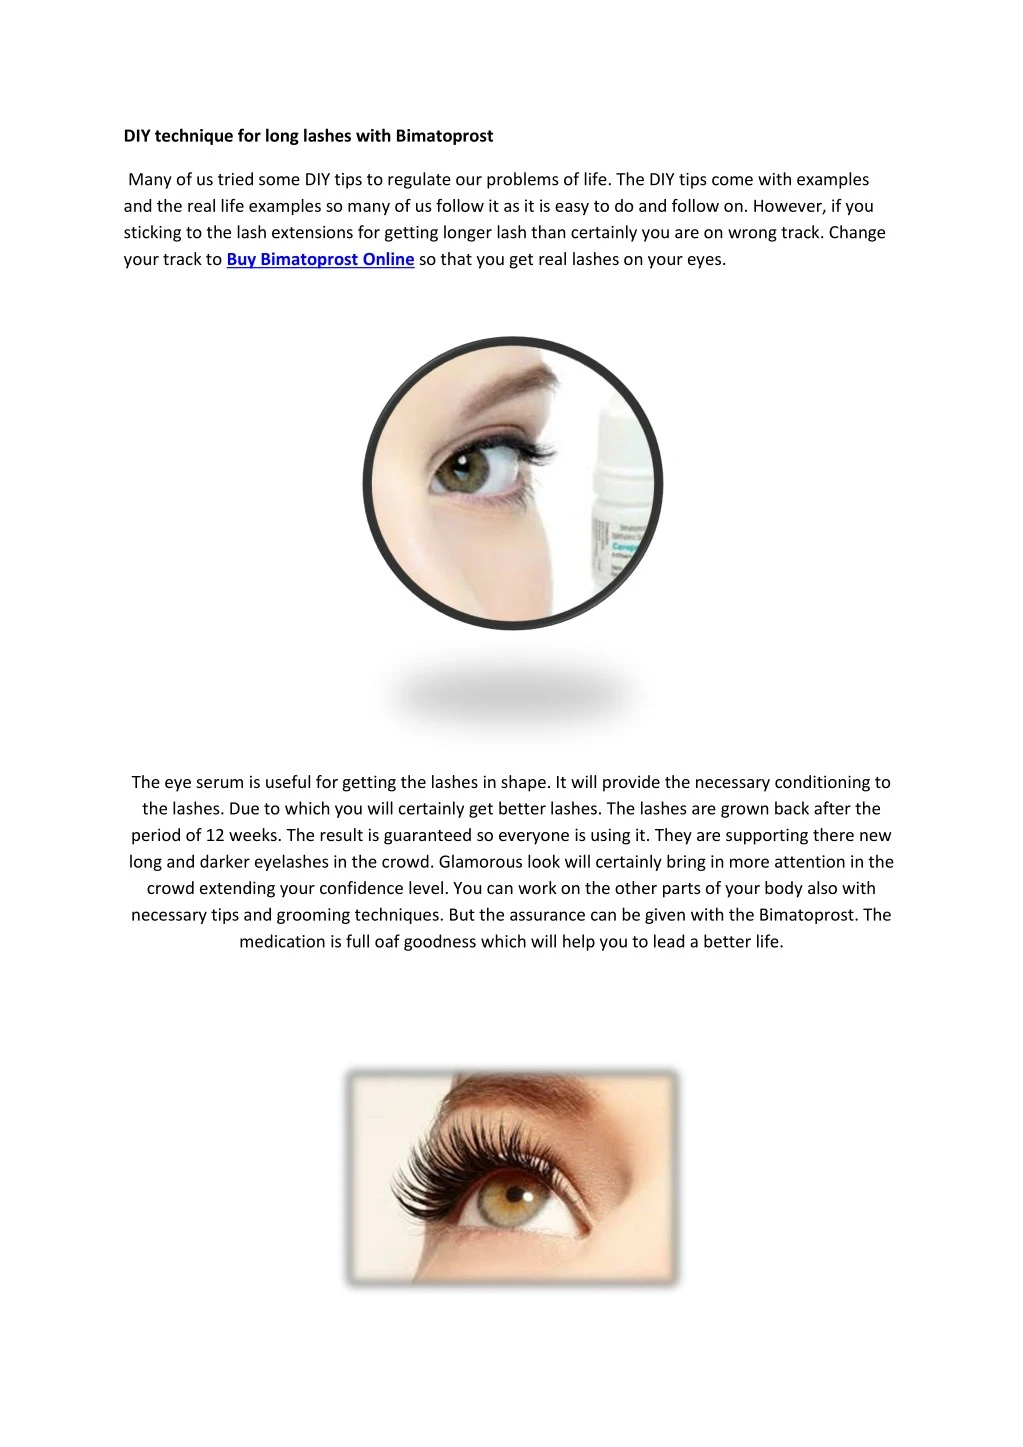 diy technique for long lashes with bimatoprost